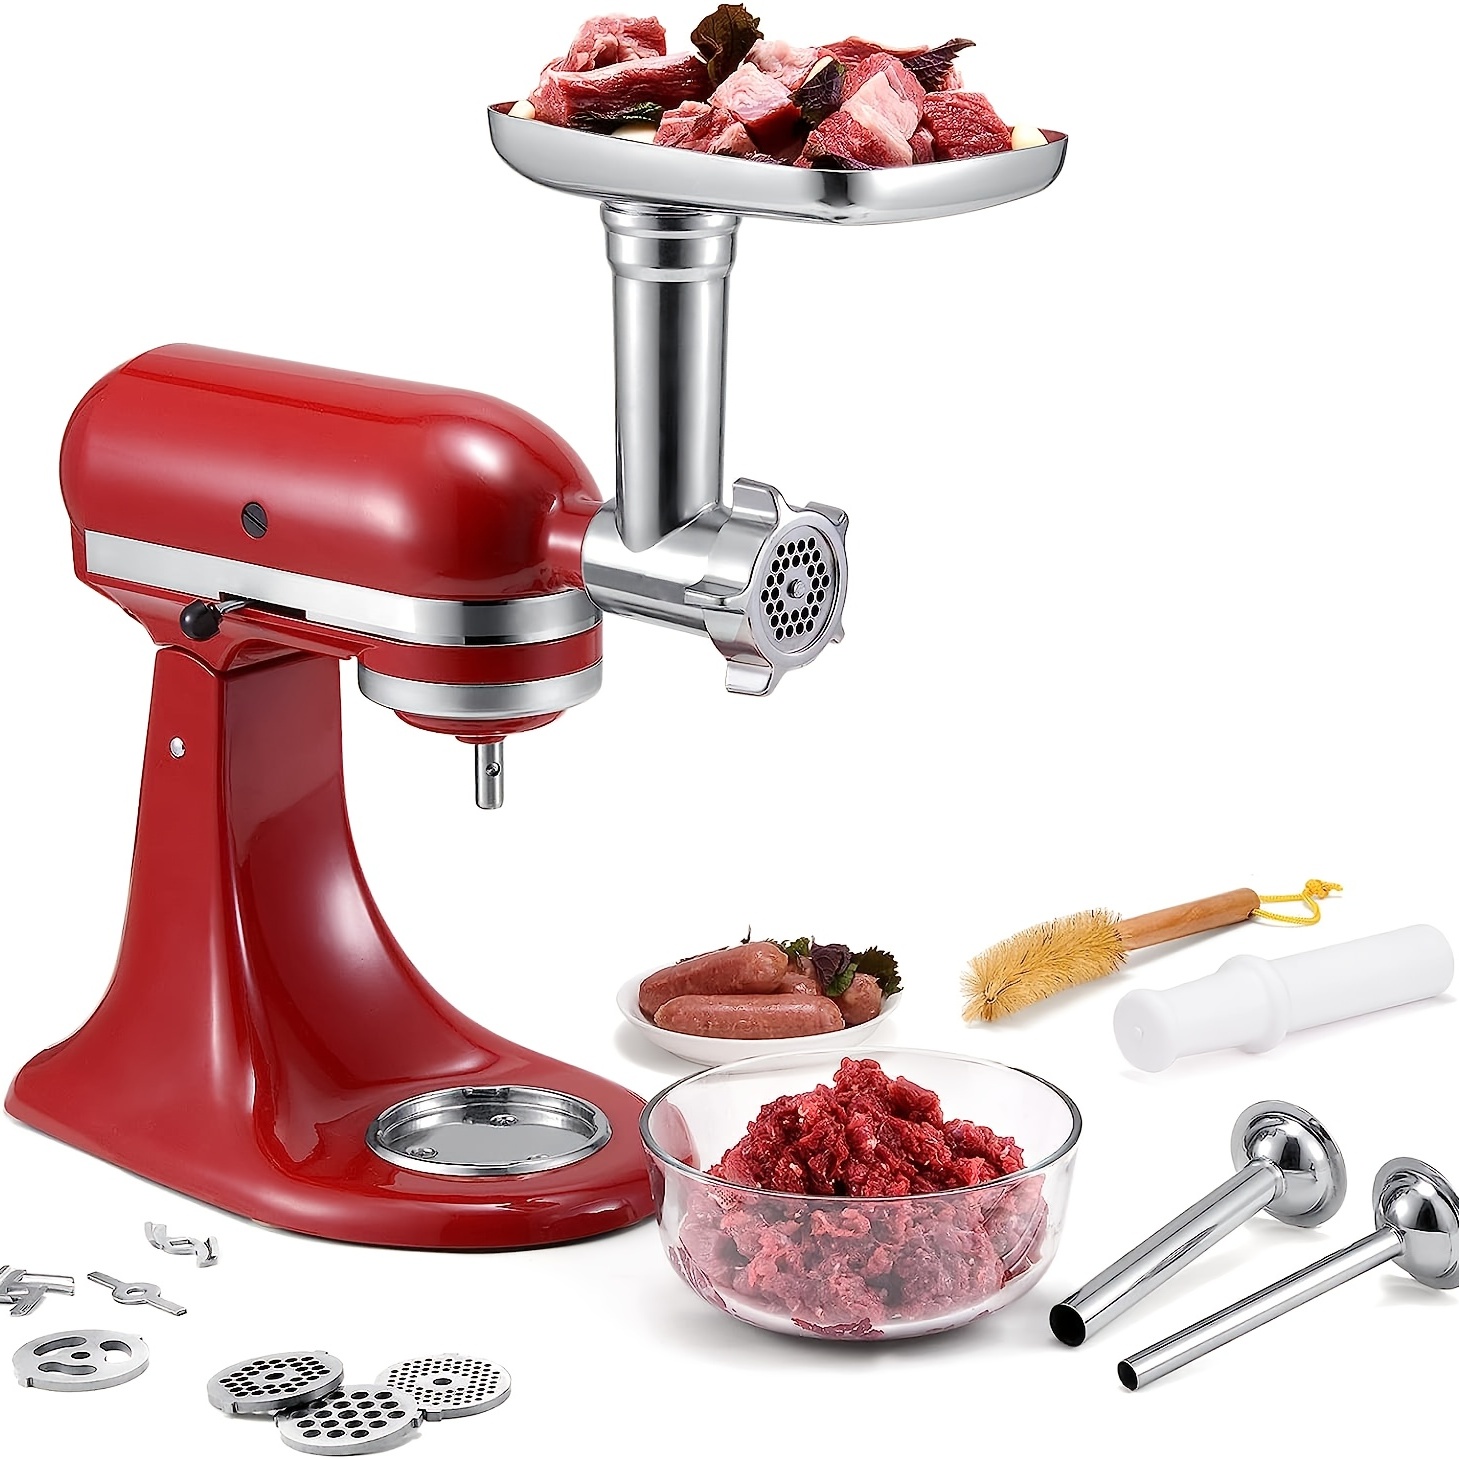 Upgraded Metal Food Meat Grinder Attachment for Kitchenaid Stand